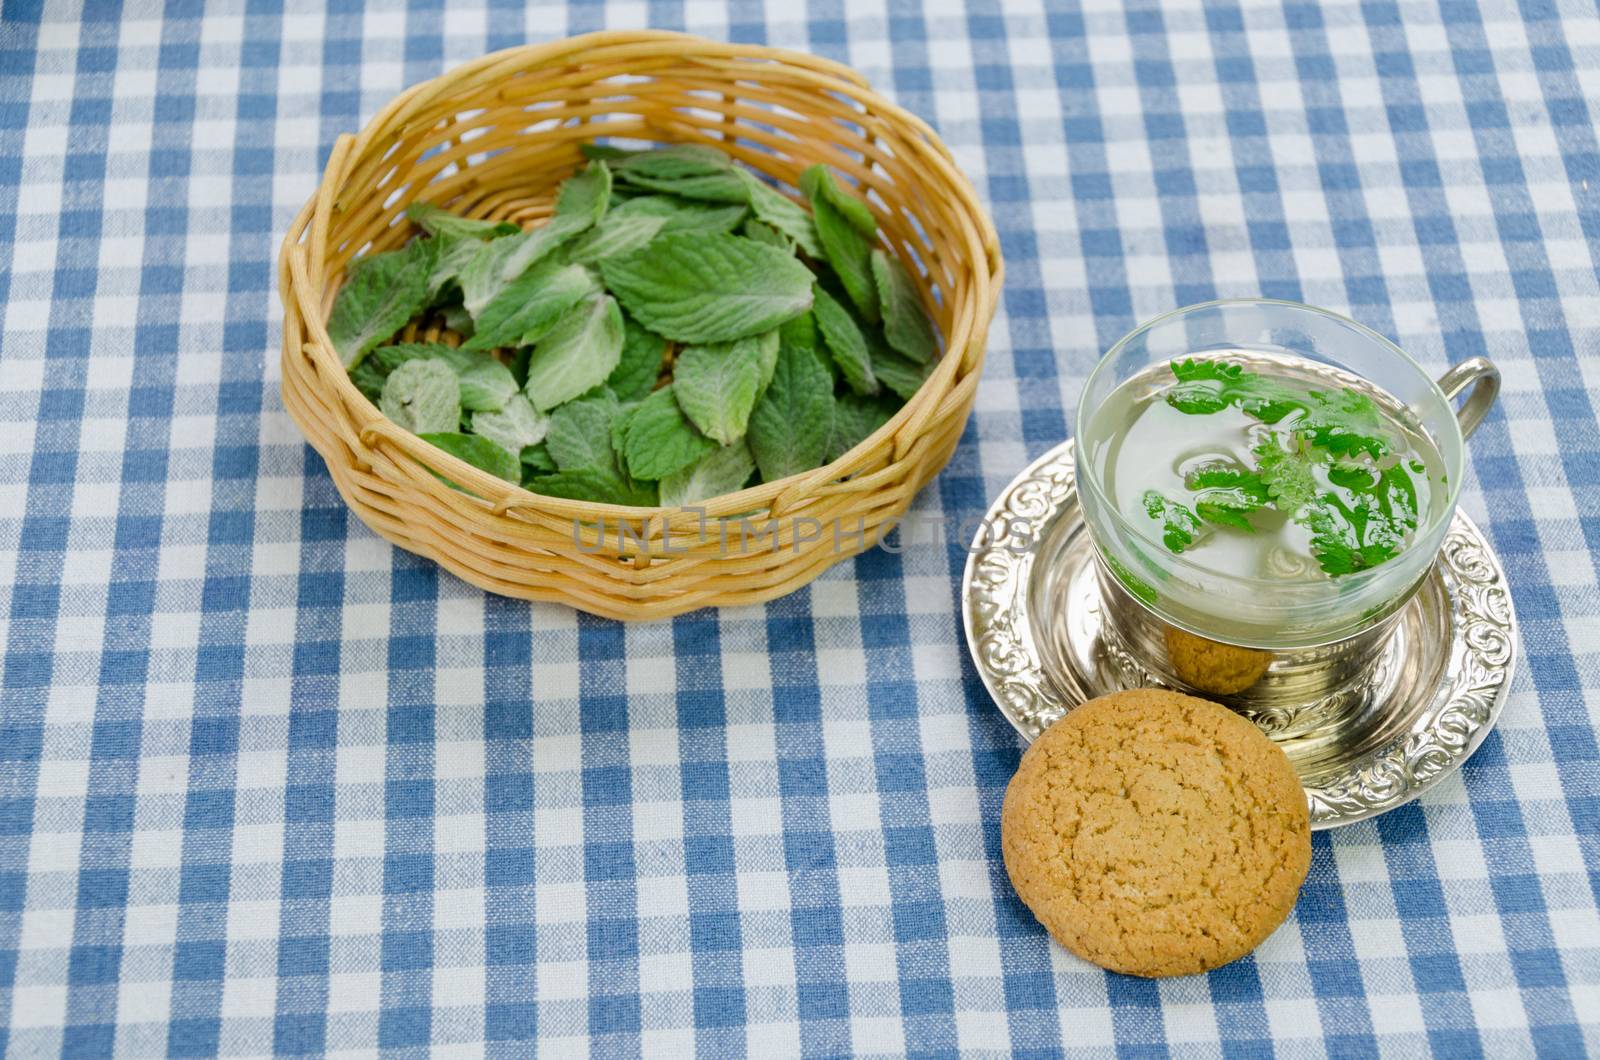 fresh healthy mint tea prepared in cup and dietary oatmeal cookie on checkered tablecloth